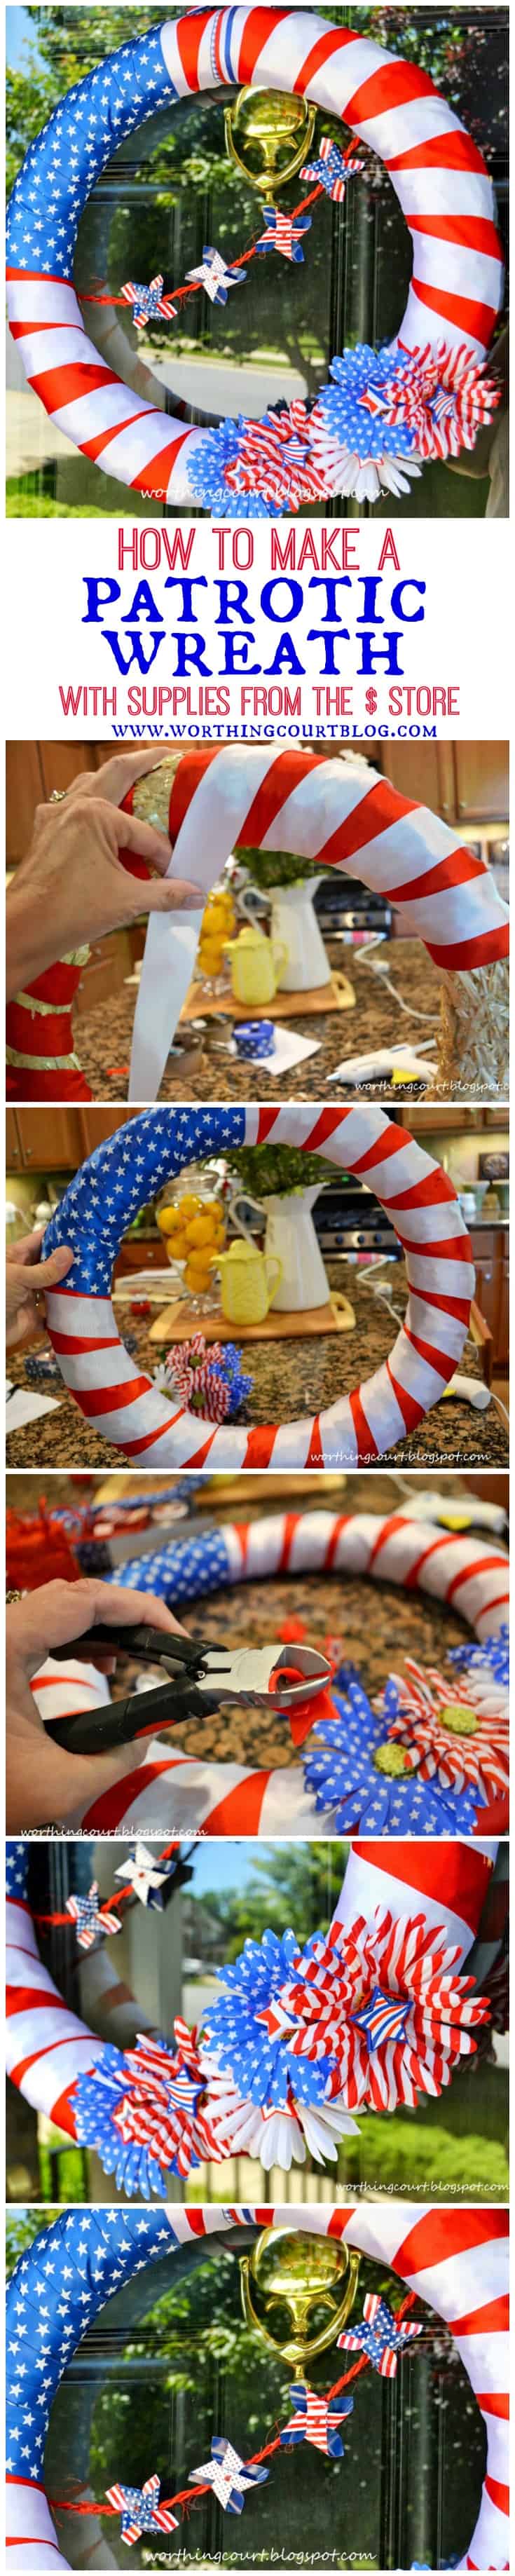 Step-by-step directions for making a patriotic wreath for Memorial Day, Flag Day and July 4th using supplies from the dollar store.